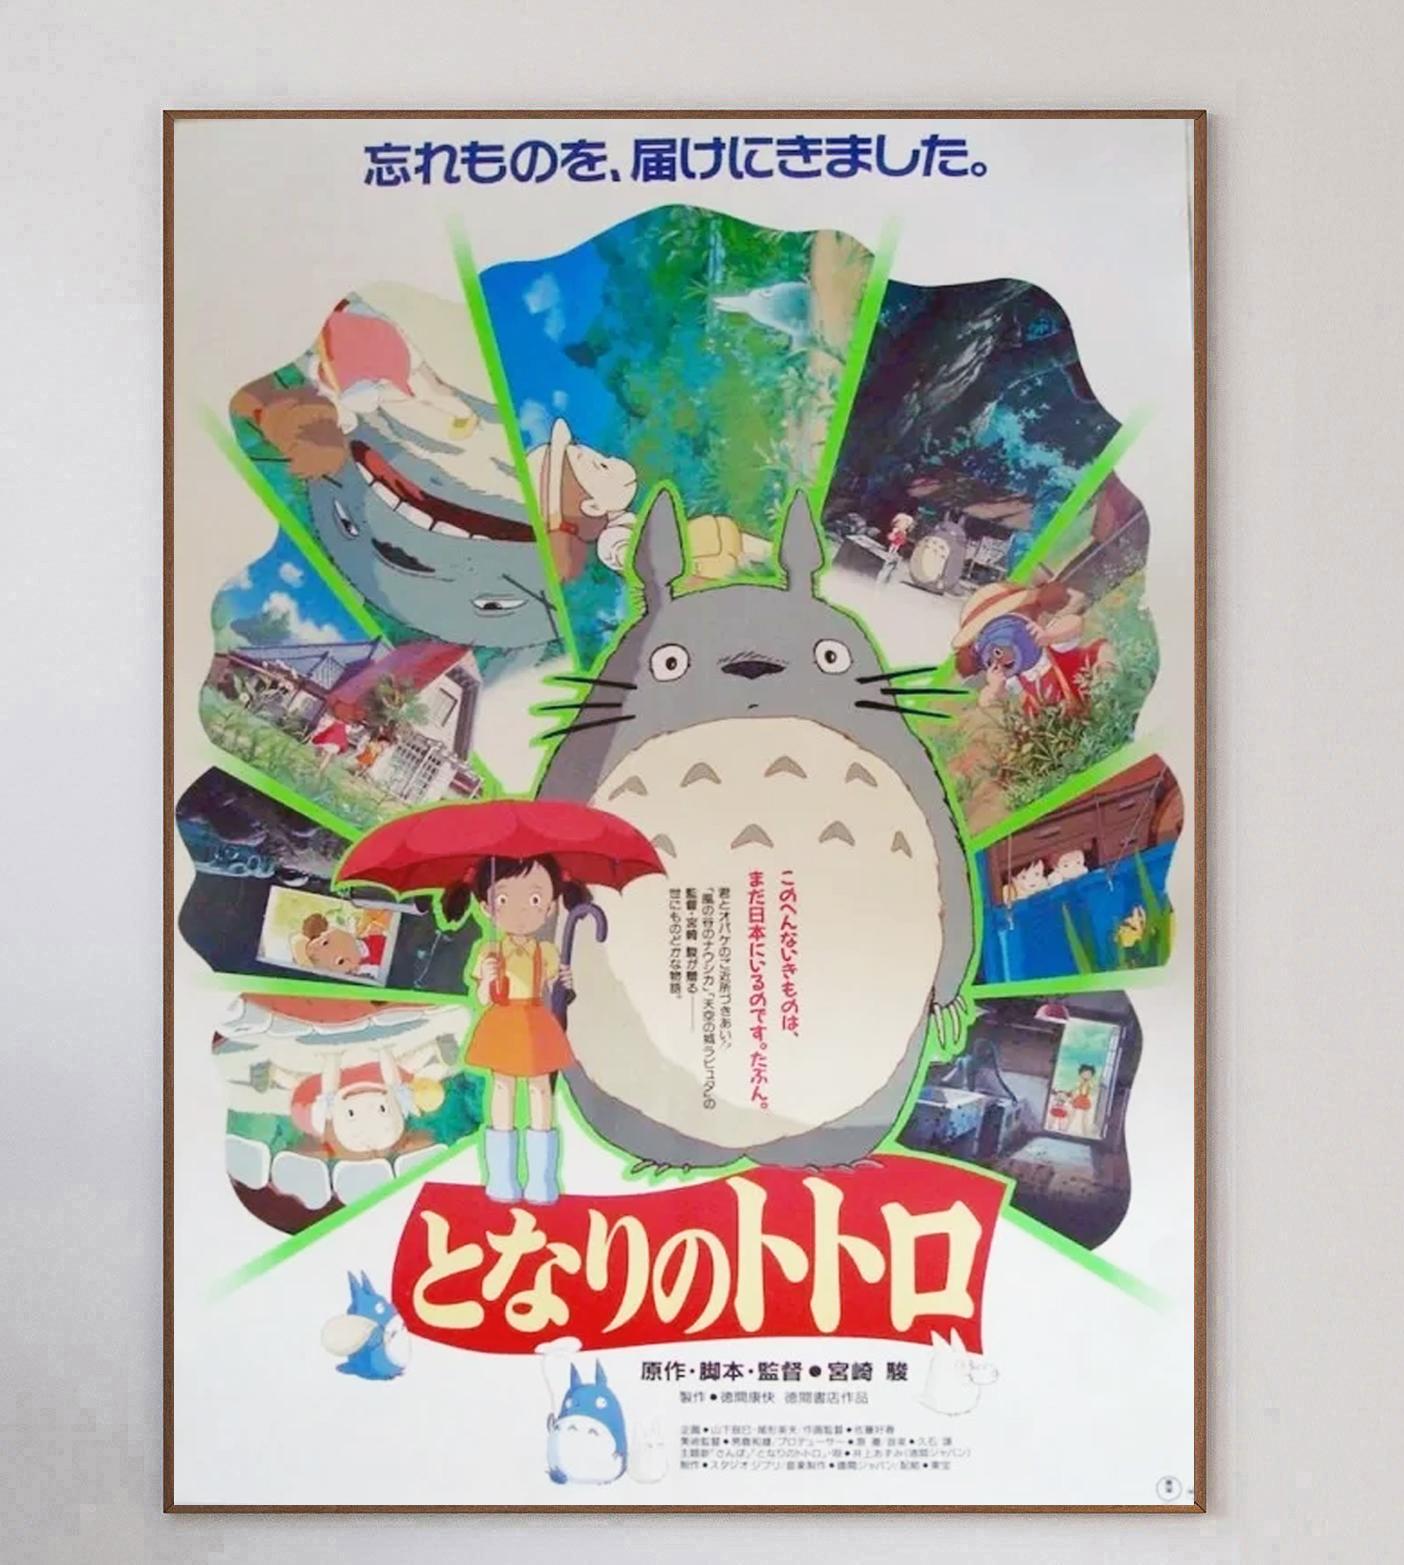 Released in 1988, written and directed by anime and animation legend Hayao Miyazaki, 